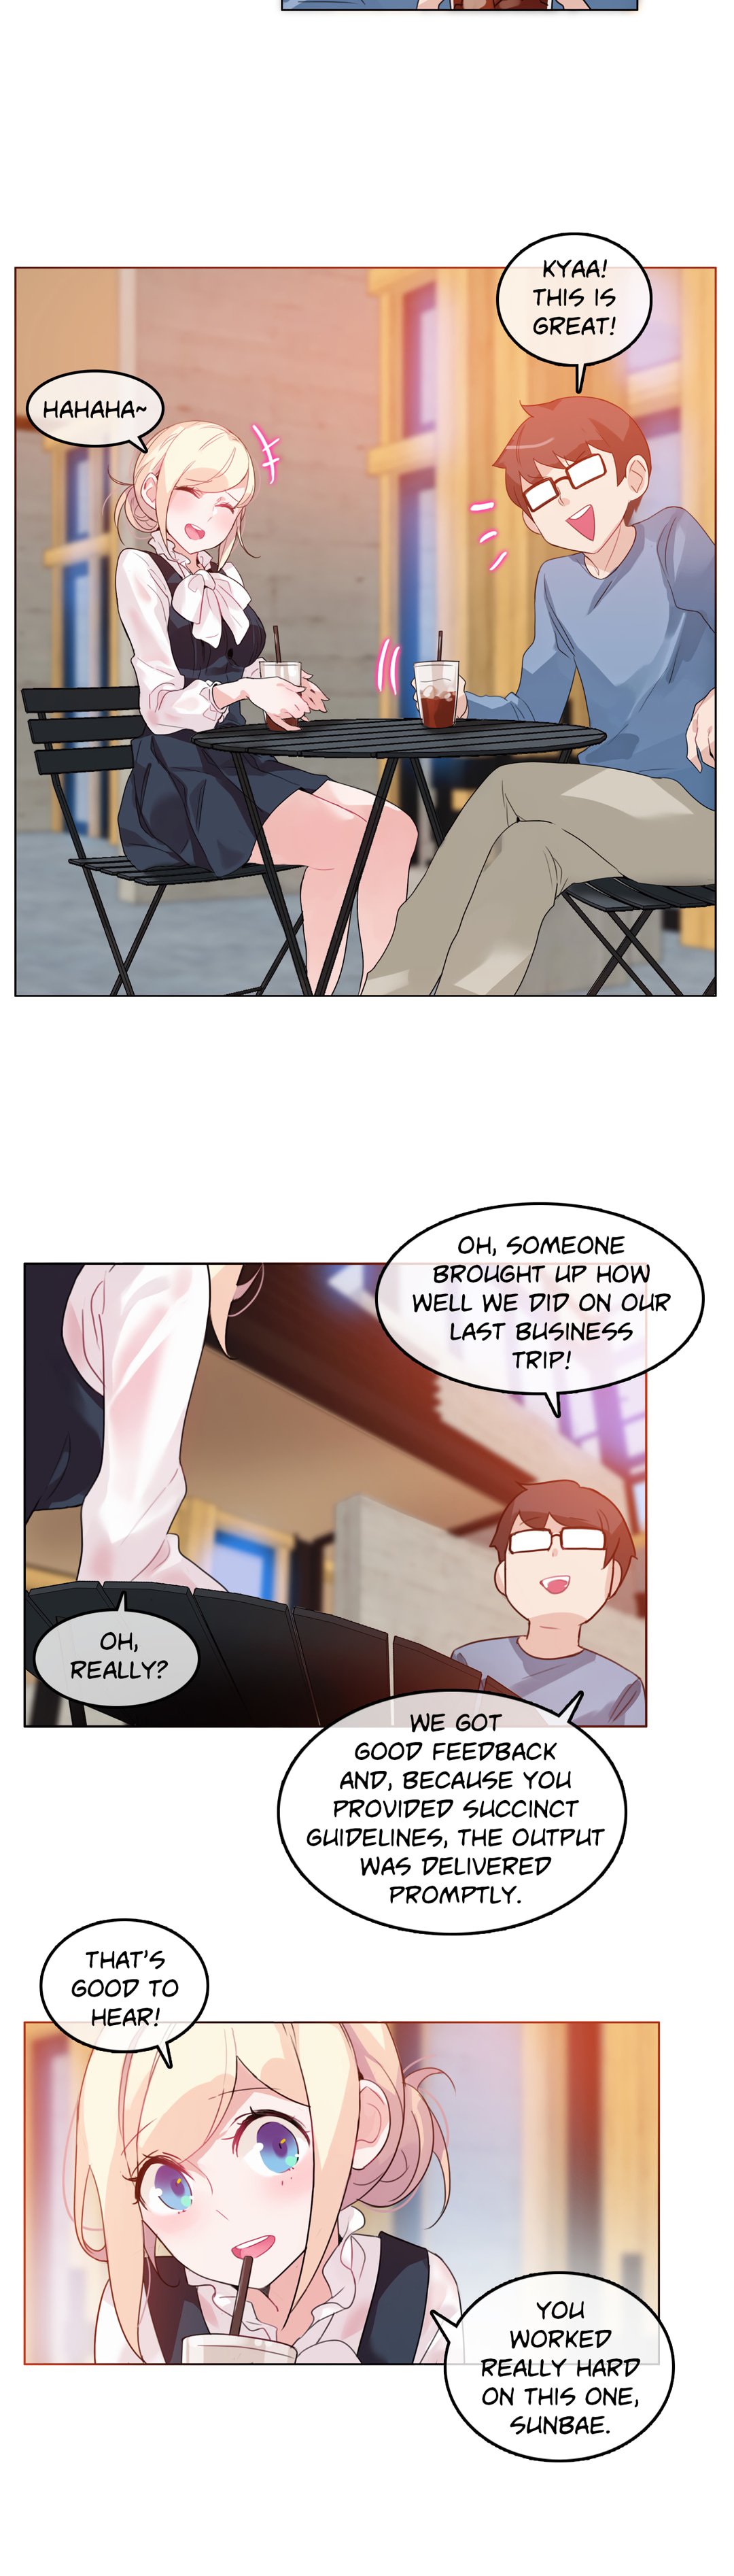 A Pervert's Daily Life - 23 page 6